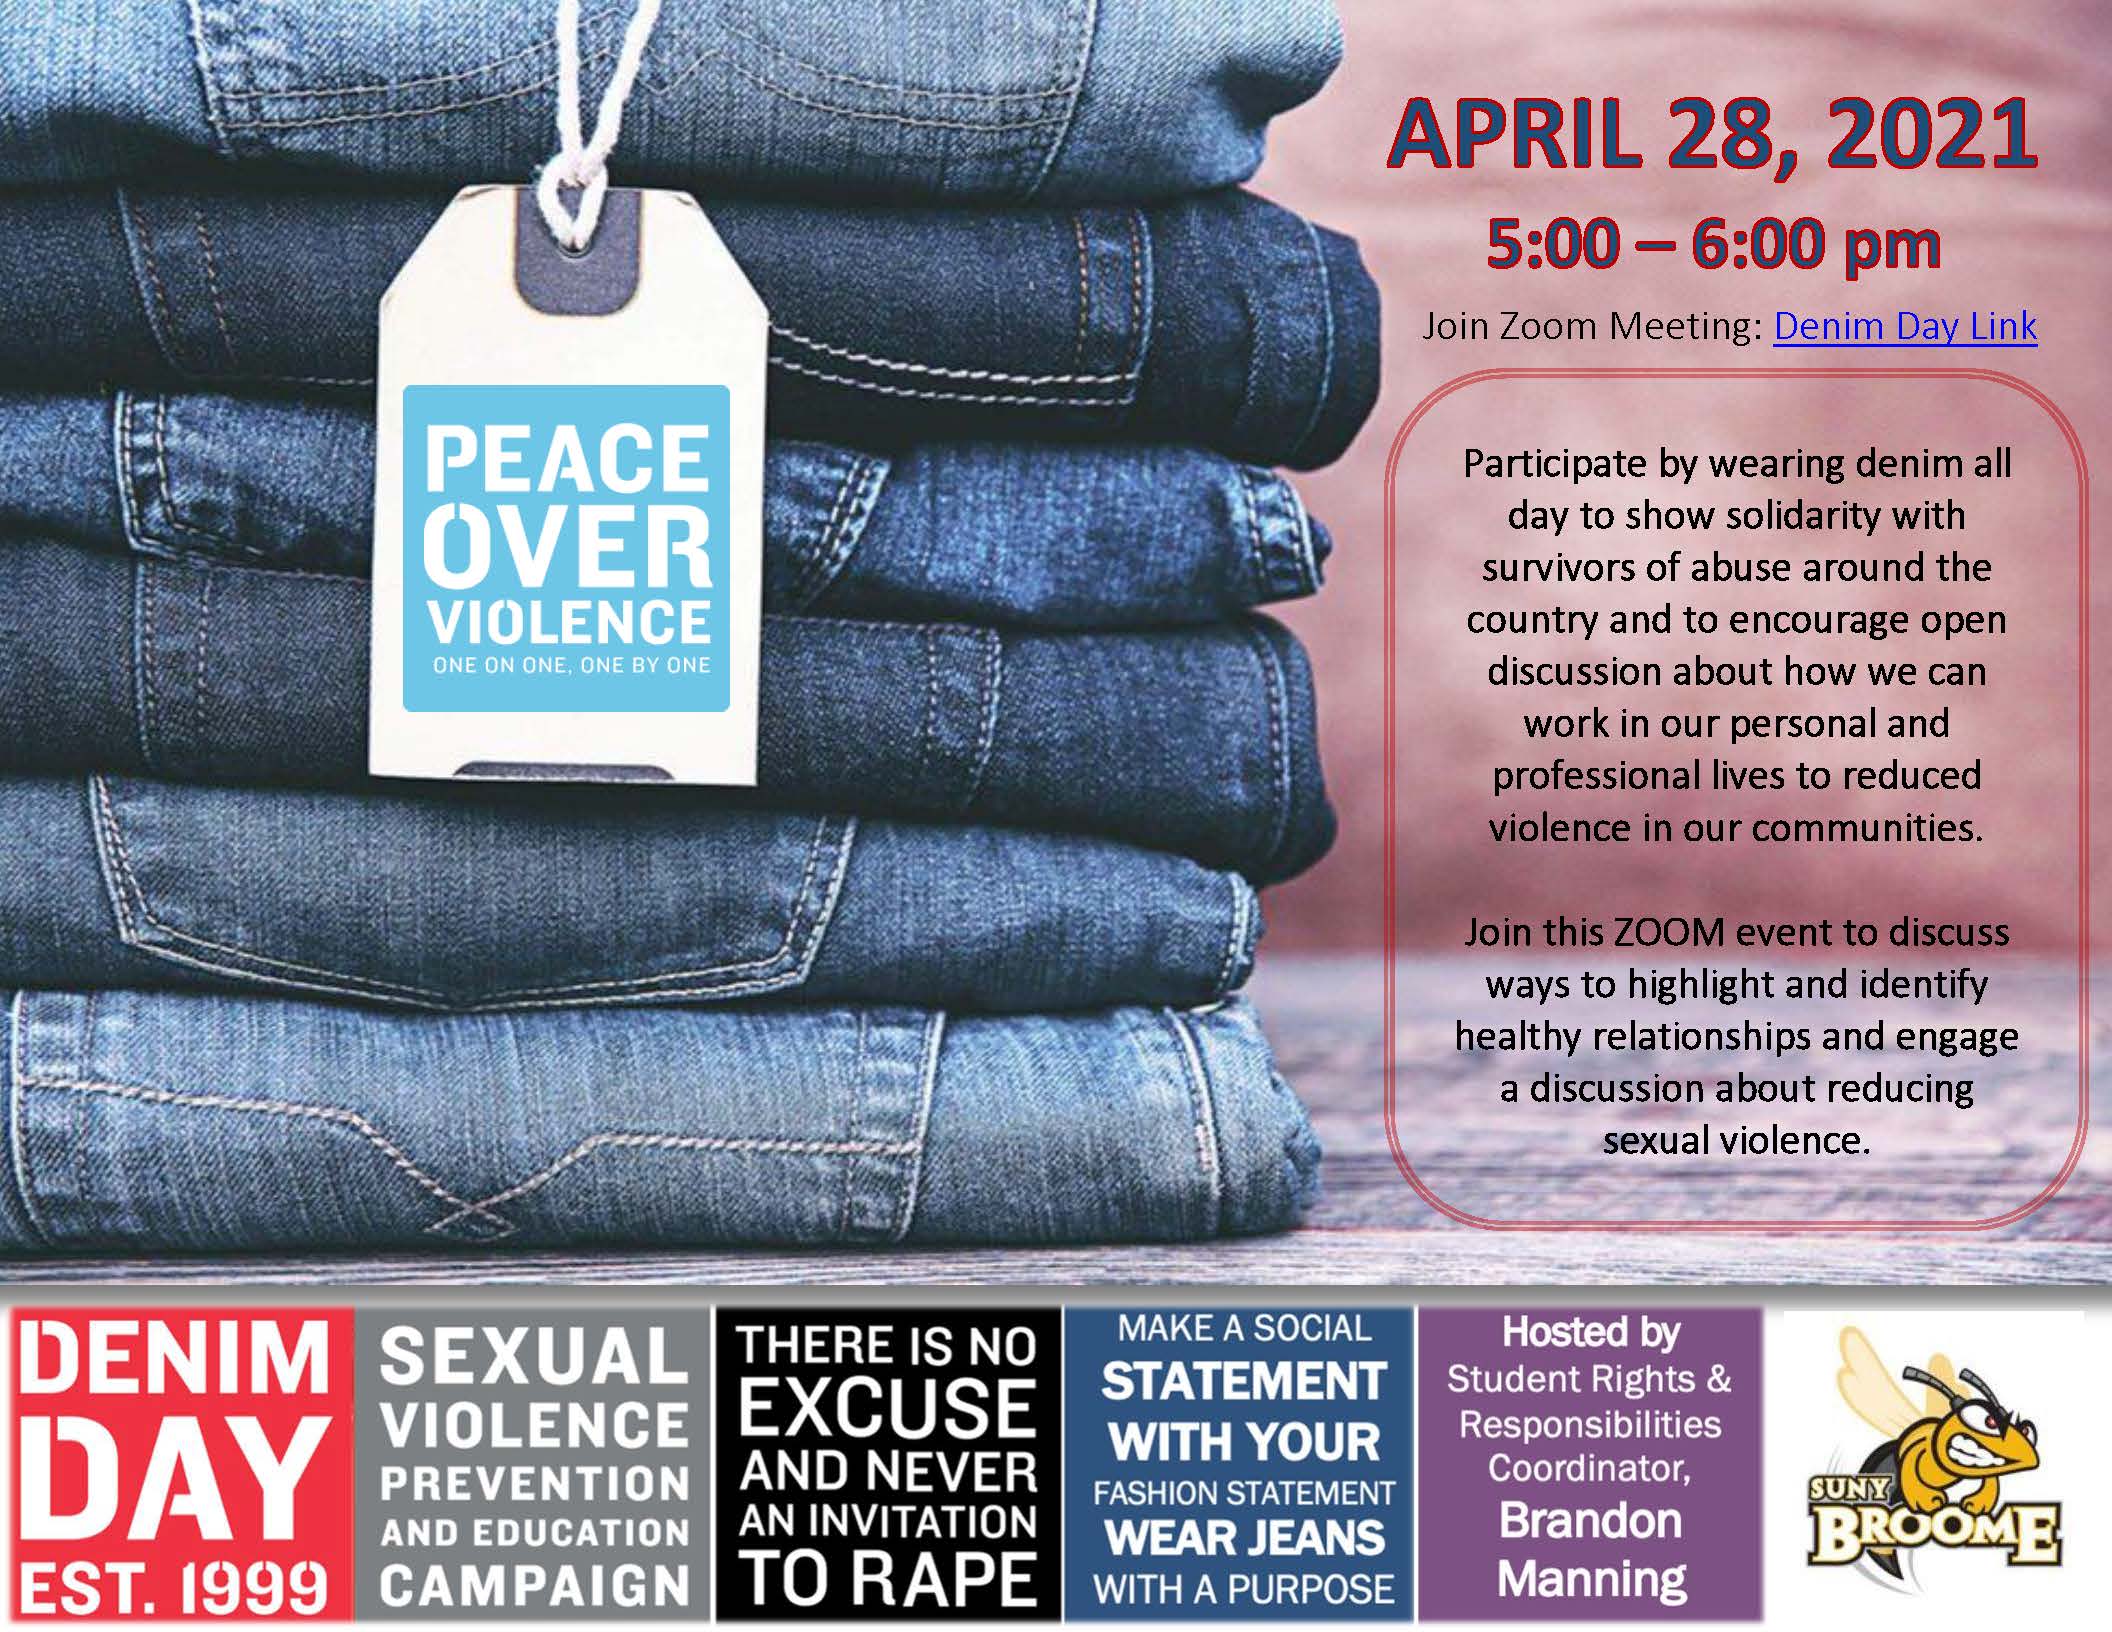 Denim Day April 28, 2021; Show solidarity with survivors of abuse around the country.